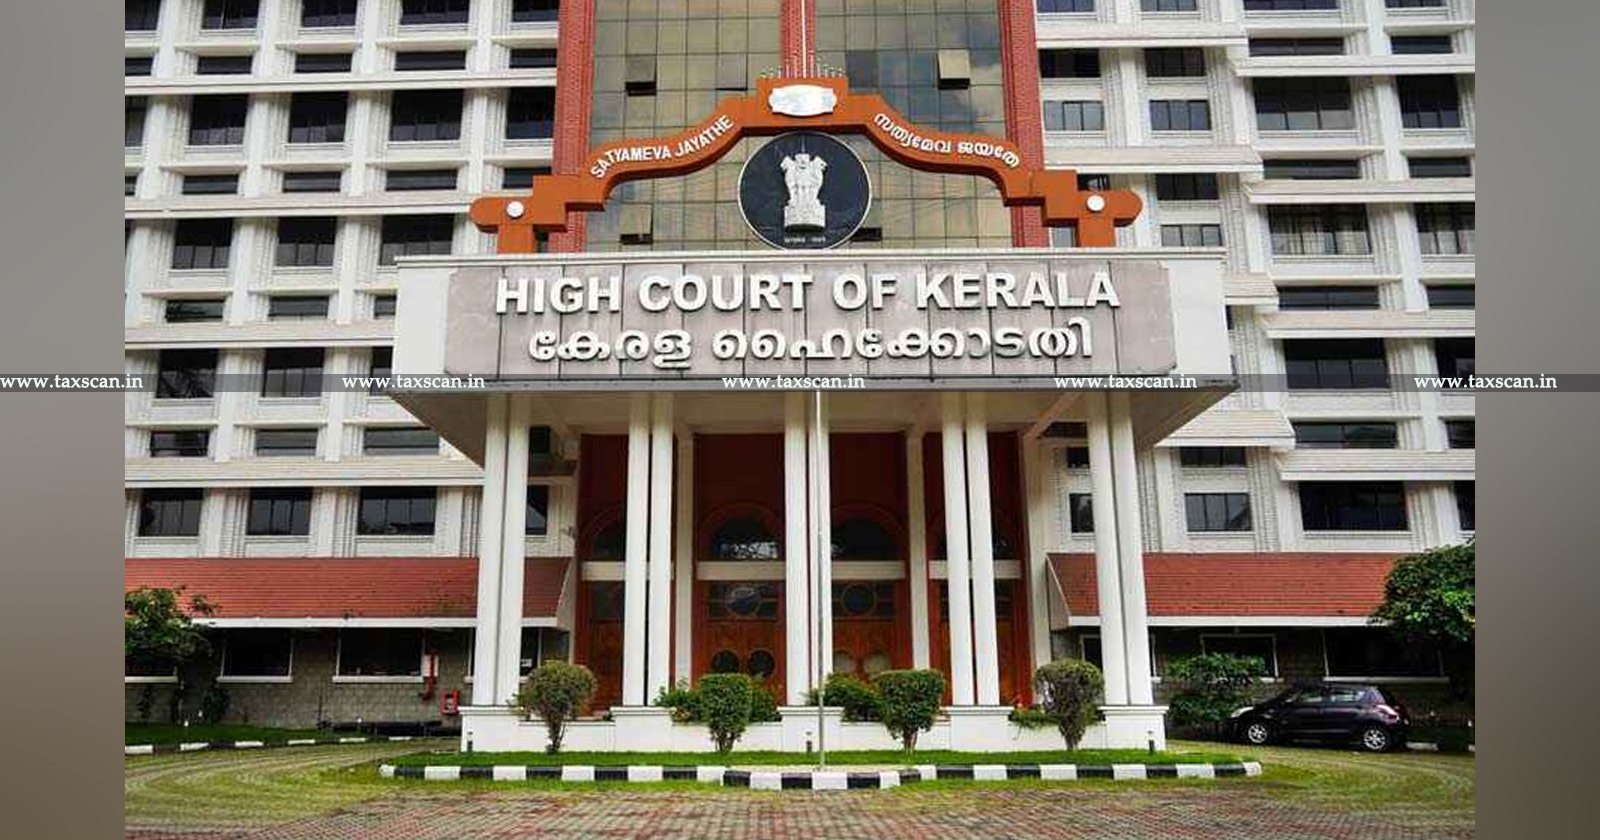 Principal Commissioner of Income Tax - Refund Claims - Kerala High Court - Fresh Consideration - Delay Justification - taxscan